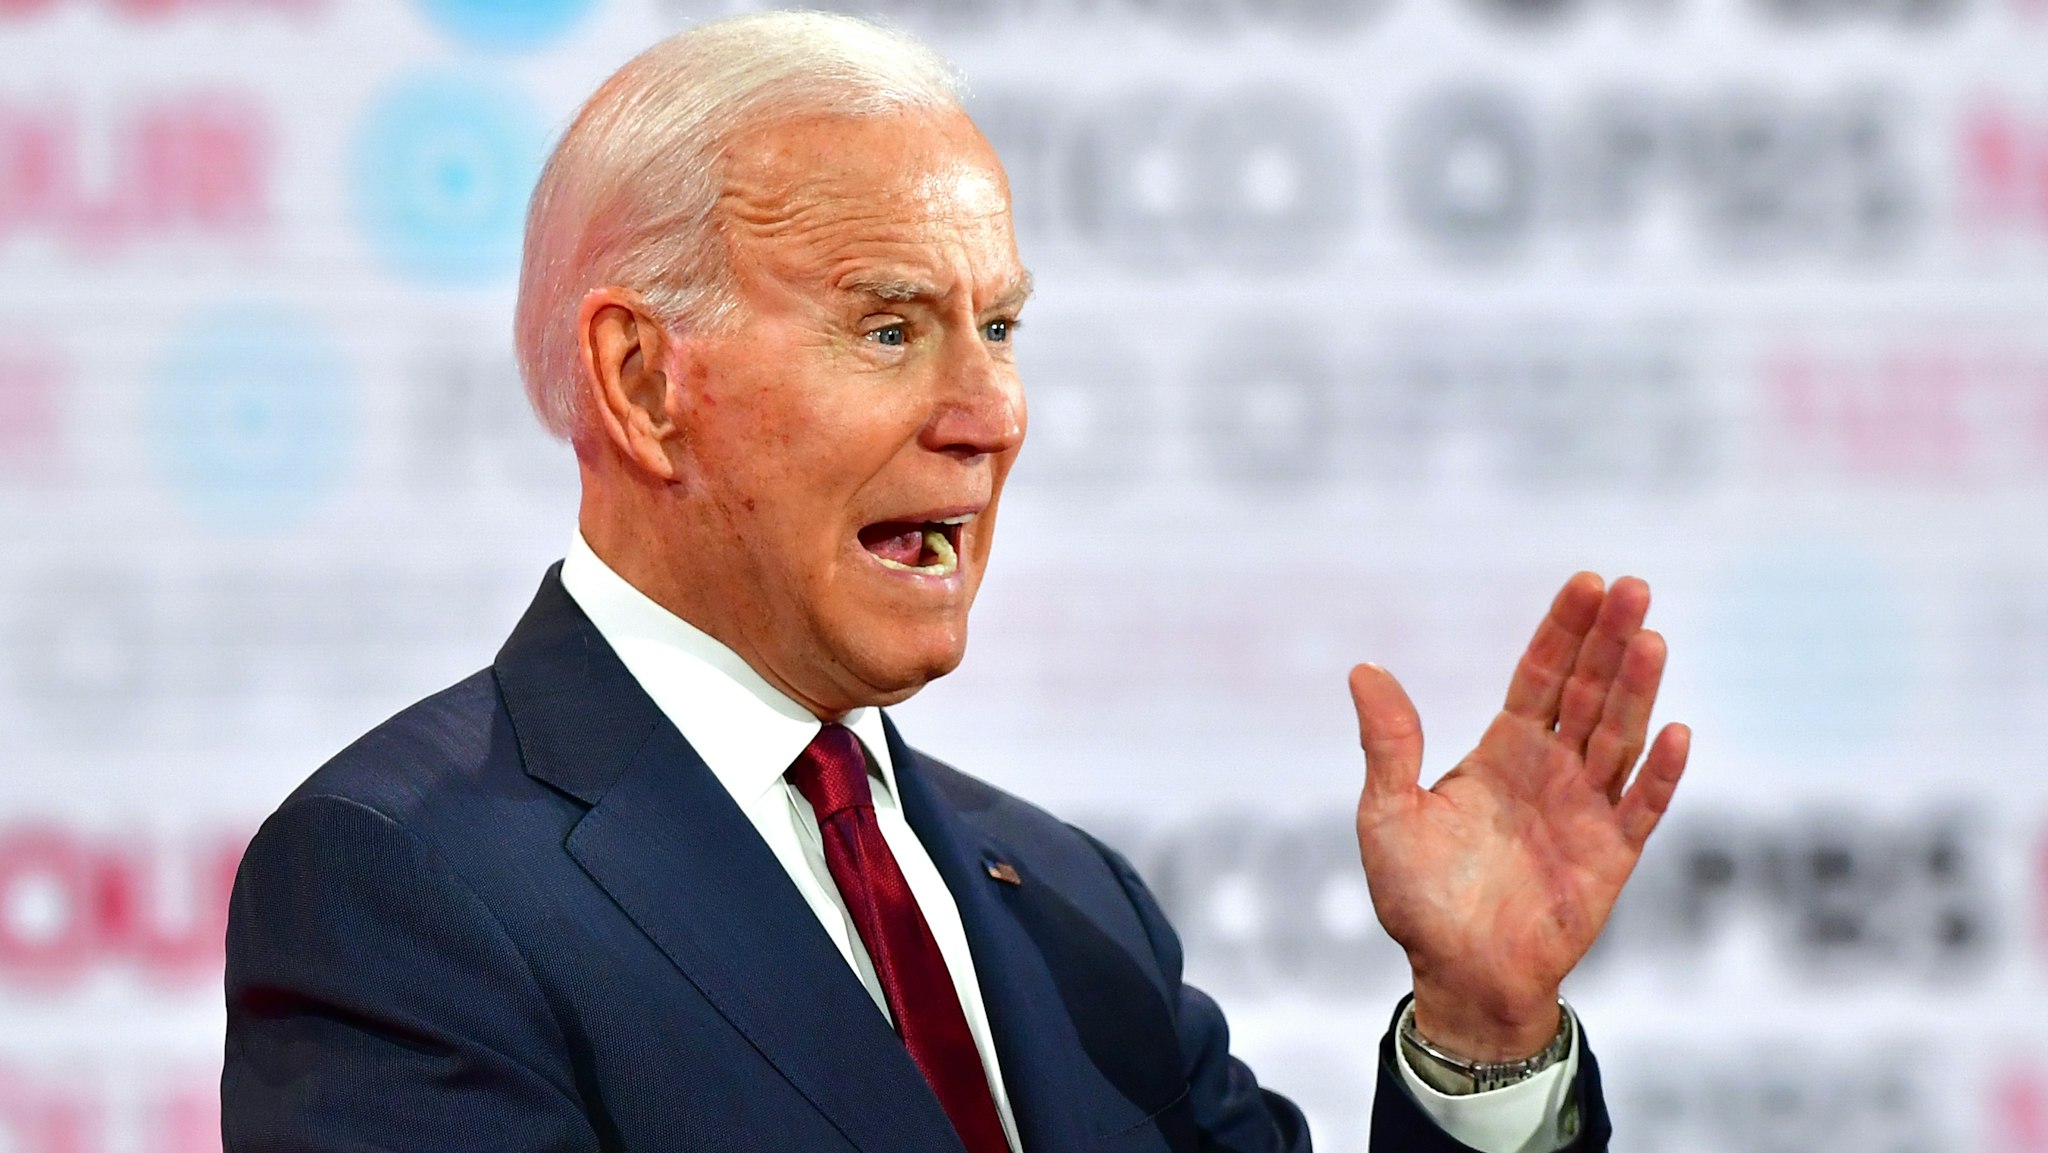 Democratic presidential hopeful former Vice President Joe Biden takes part in the sixth Democratic primary debate of the 2020 presidential campaign season co-hosted by PBS NewsHour &amp; Politico at Loyola Marymount University in Los Angeles, California on December 19, 2019.